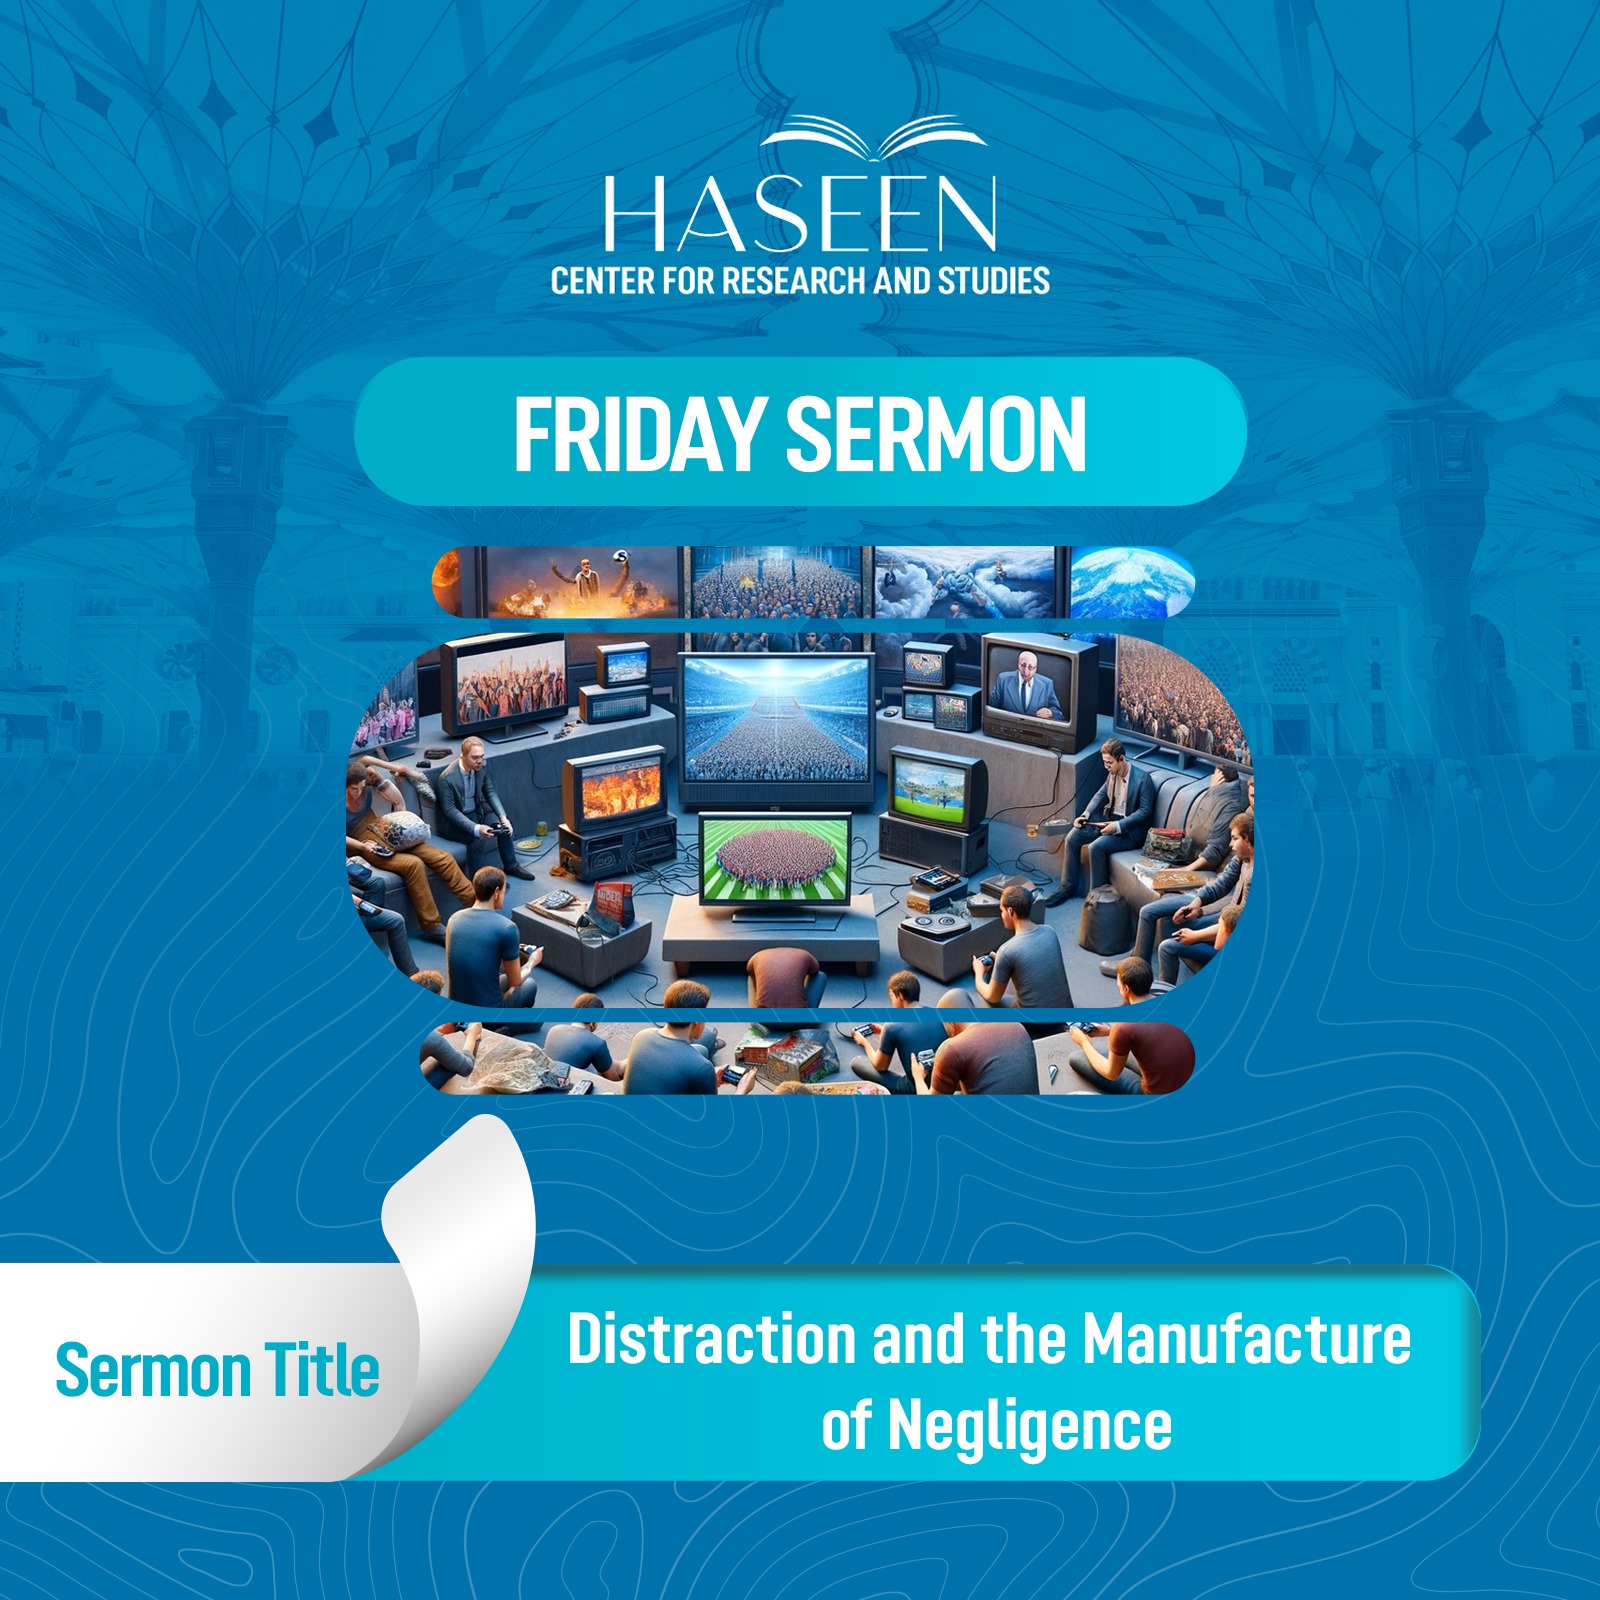 Title of the sermon: Distraction and the Manufacture of Negligence